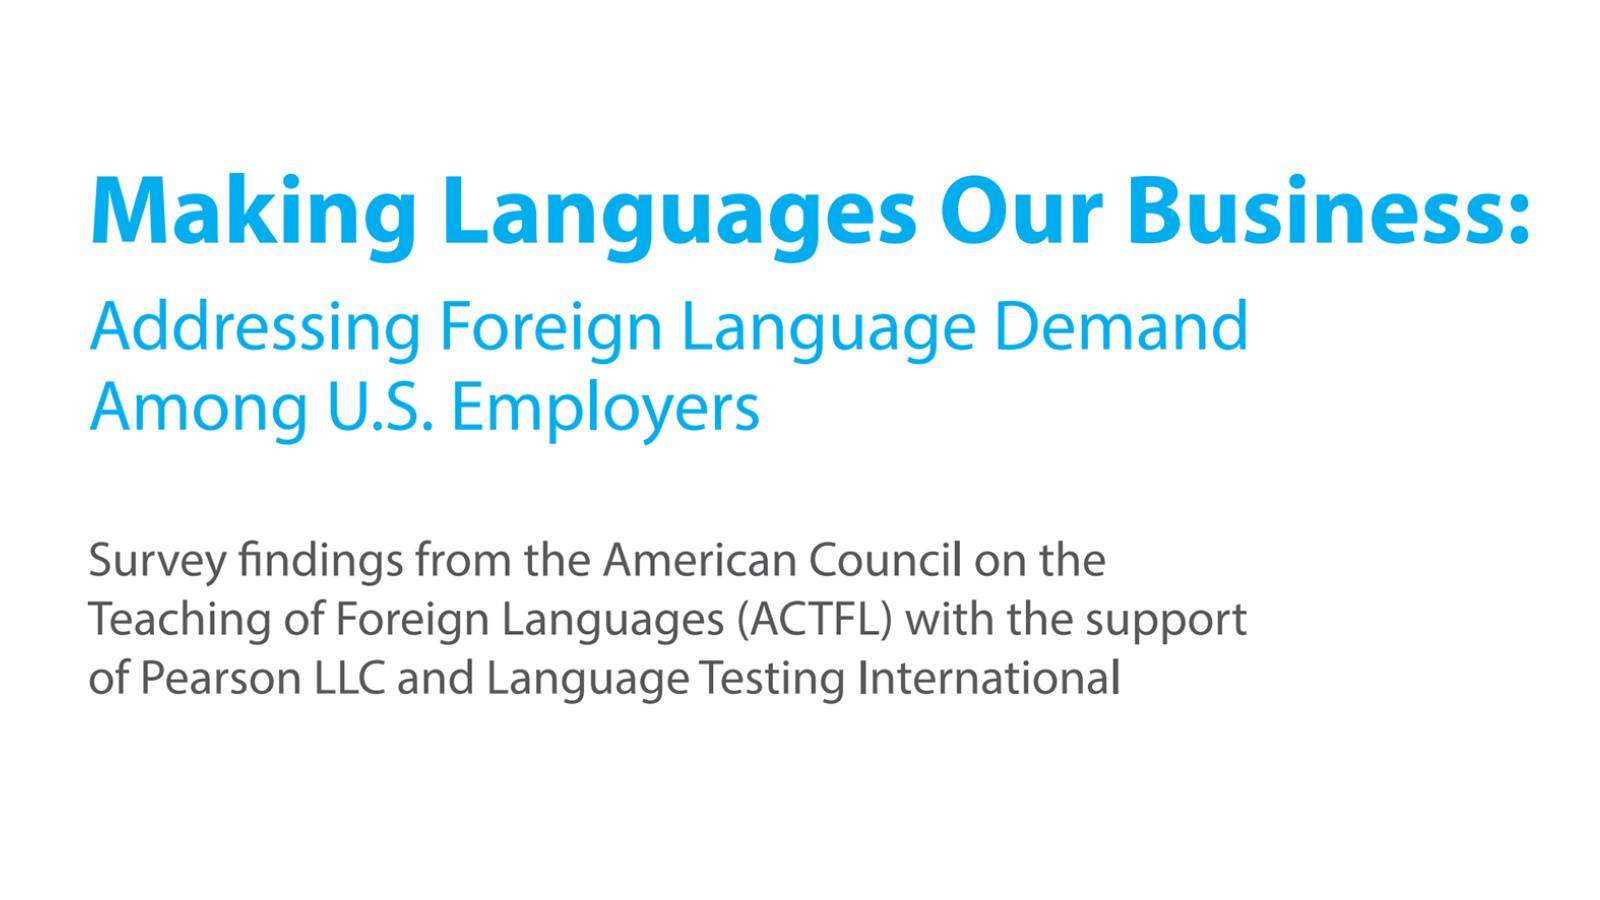 Text: Making Languages Our Business: Addressing Foreign Language Demand Among U.S. Employers. Survey findings from the American Council on the Teaching of Foreign Languages (ACTFL) with the support of Pearson LLC and Language Testing International.